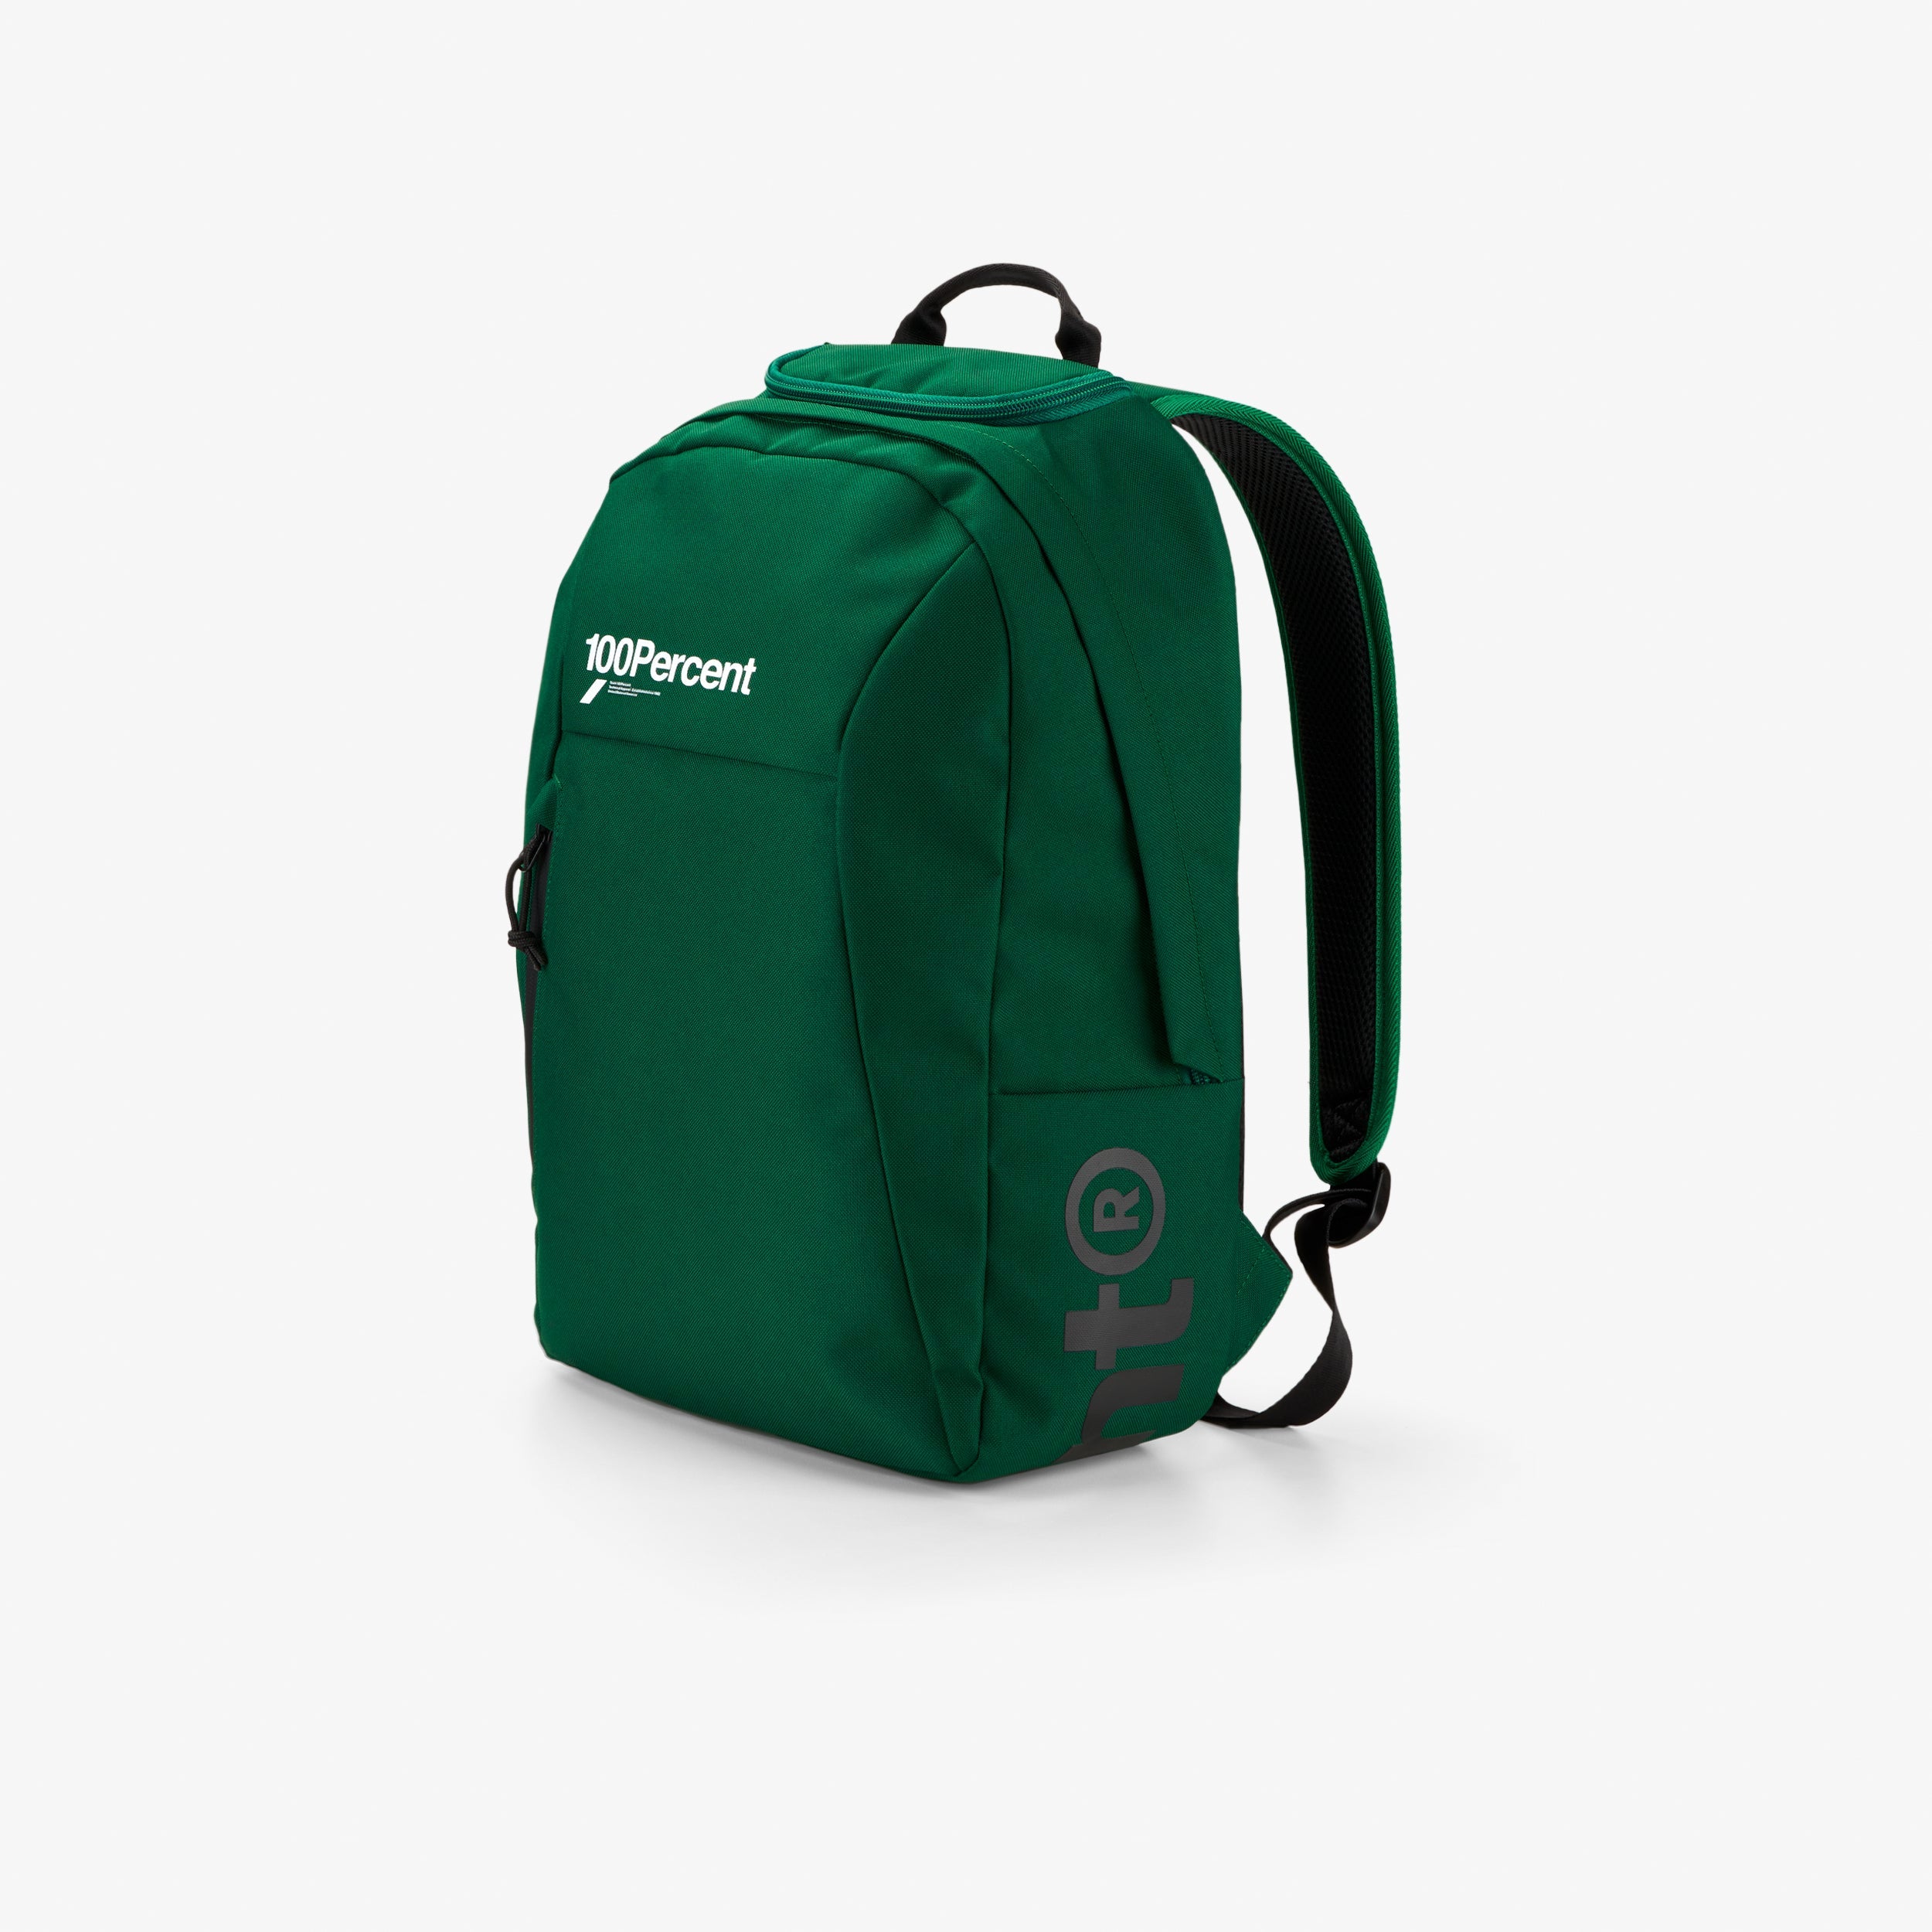 SKYCAP Backpack Forest